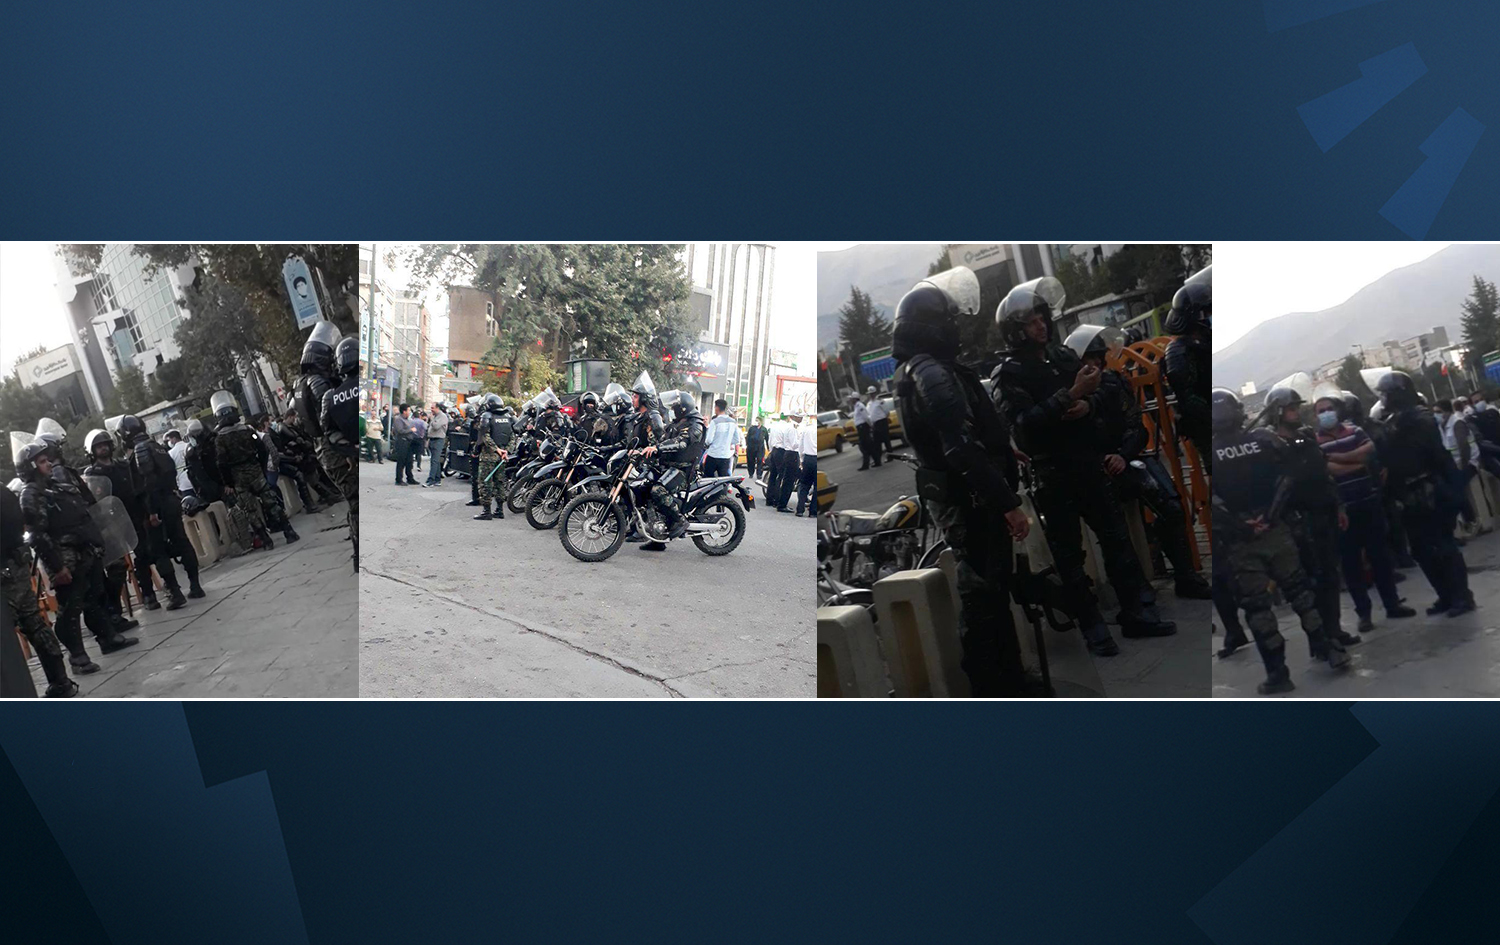 Photos of riot police deployed in the Kurdish city of Sanandaj in western Iran (Rojhelat). Photos: Submitted by Leila